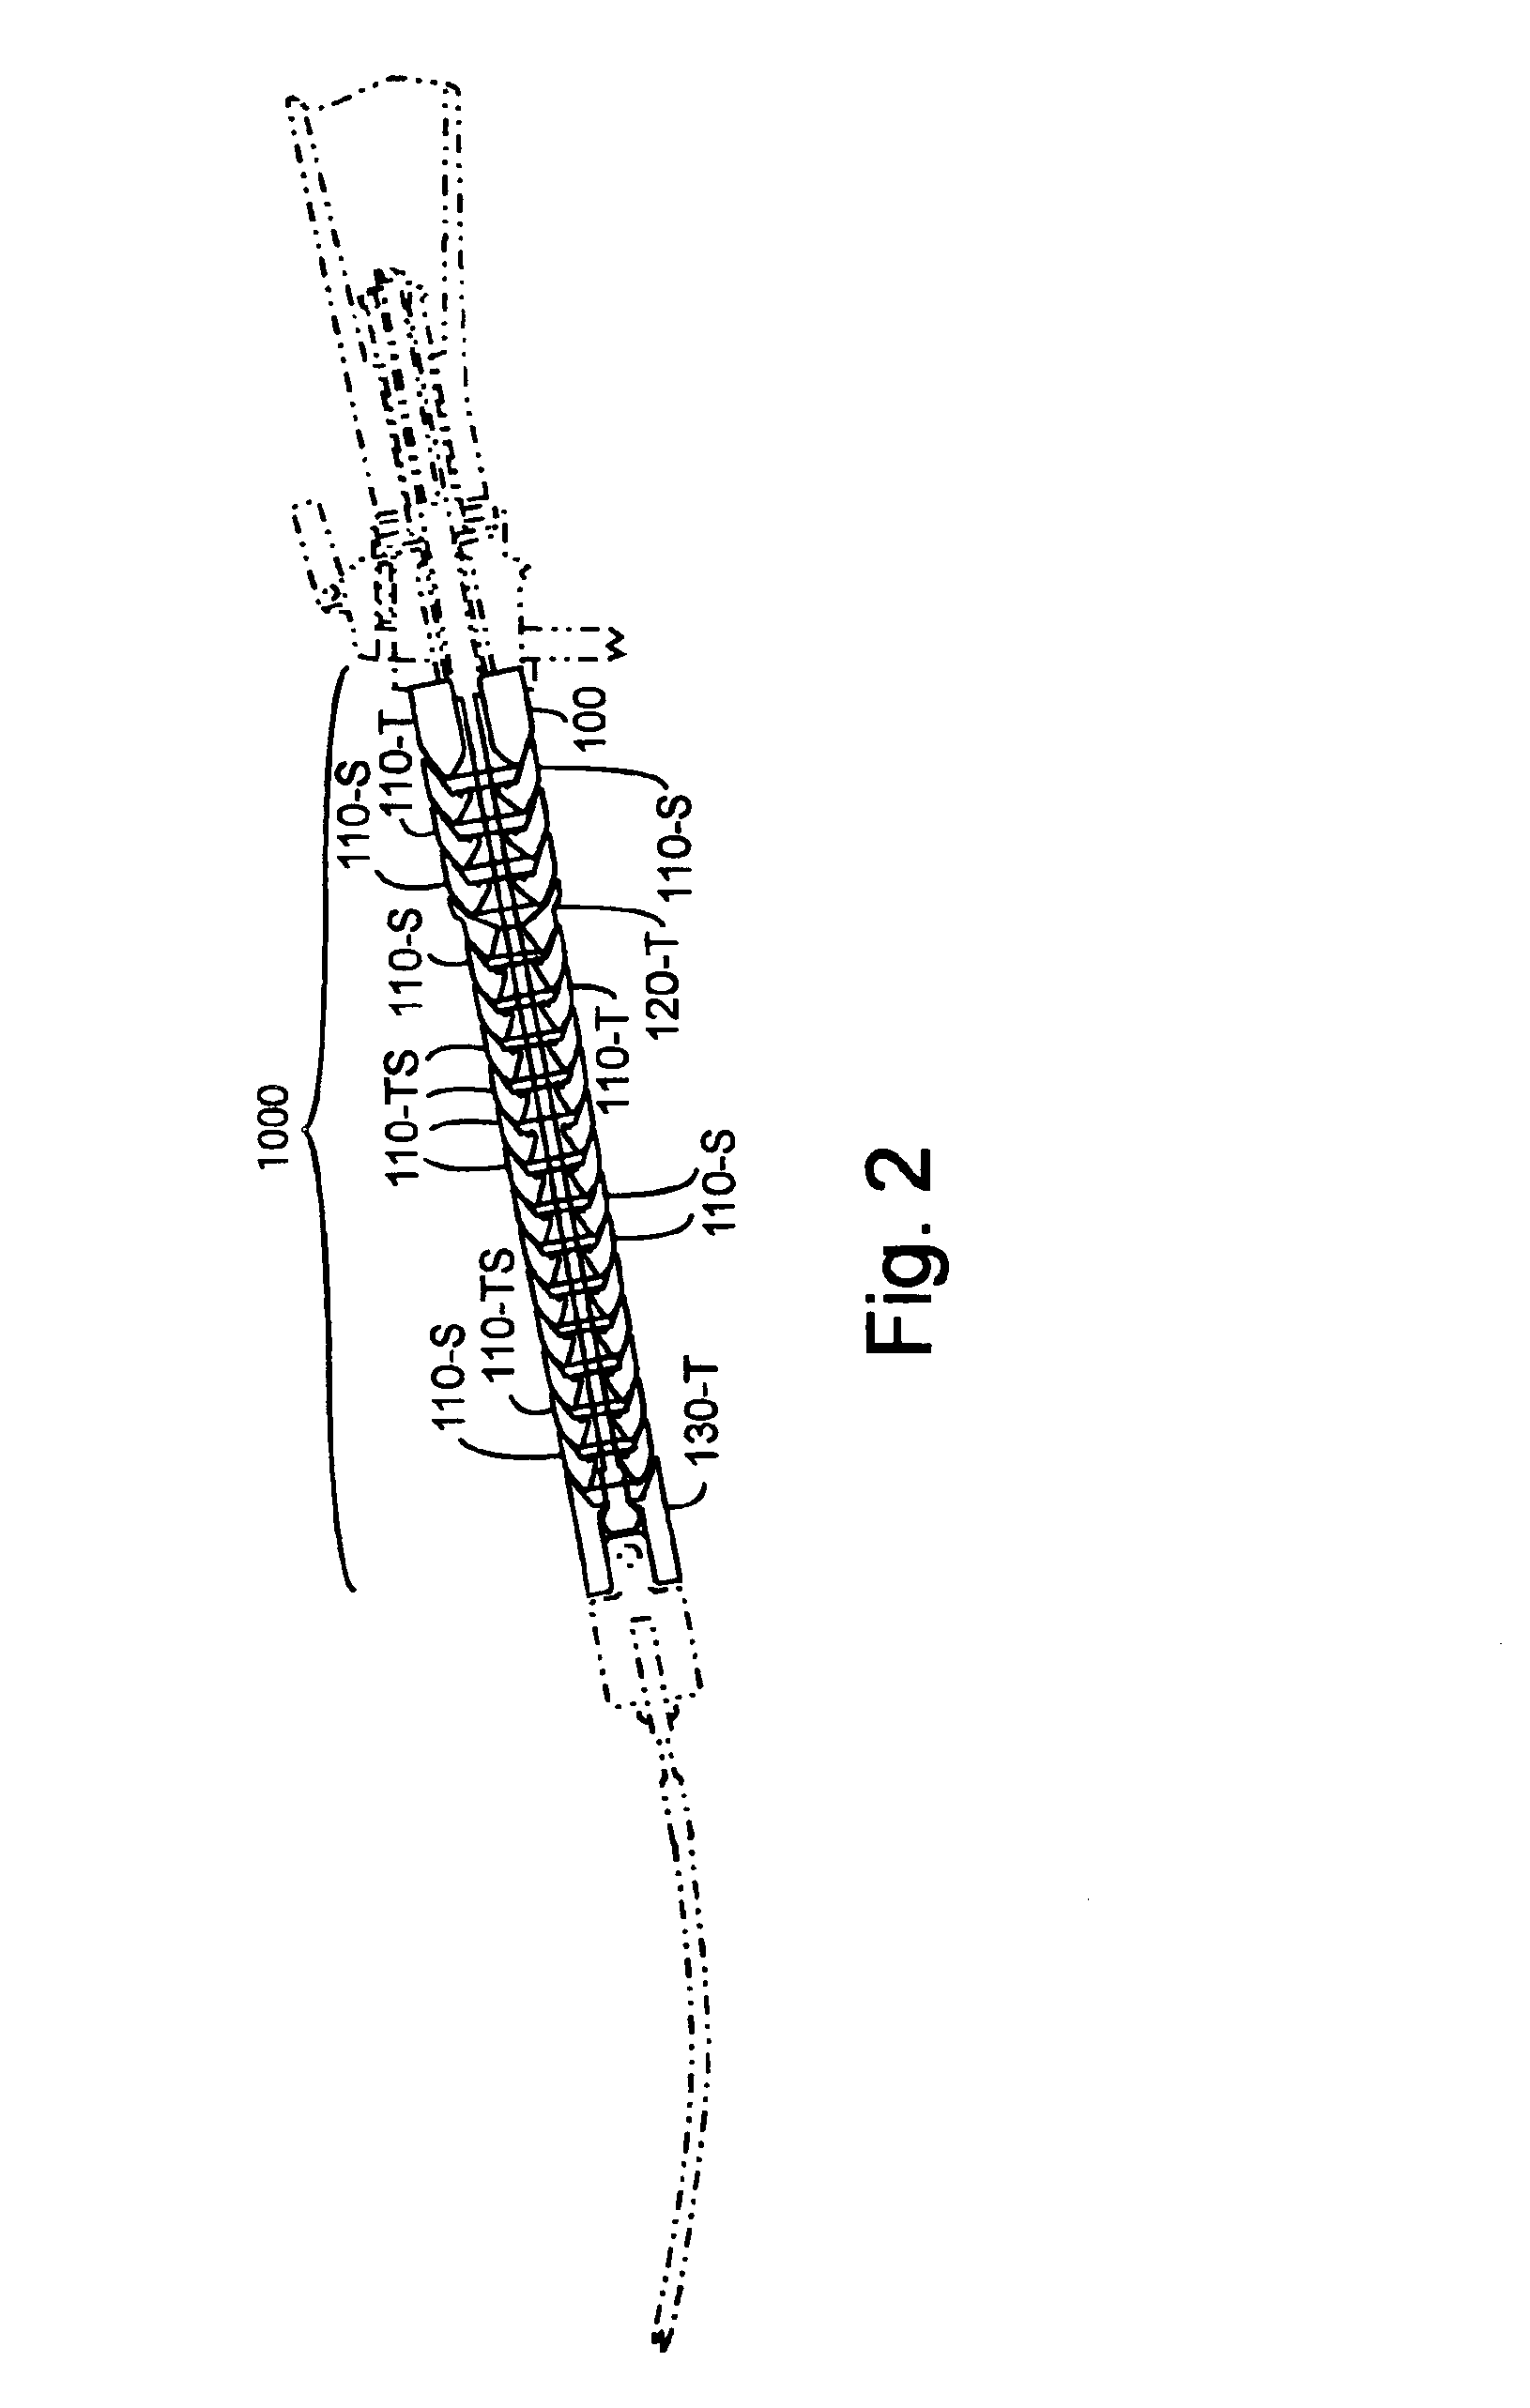 Method and apparatus for improved stiffness in the linkage assembly of a flexible arm